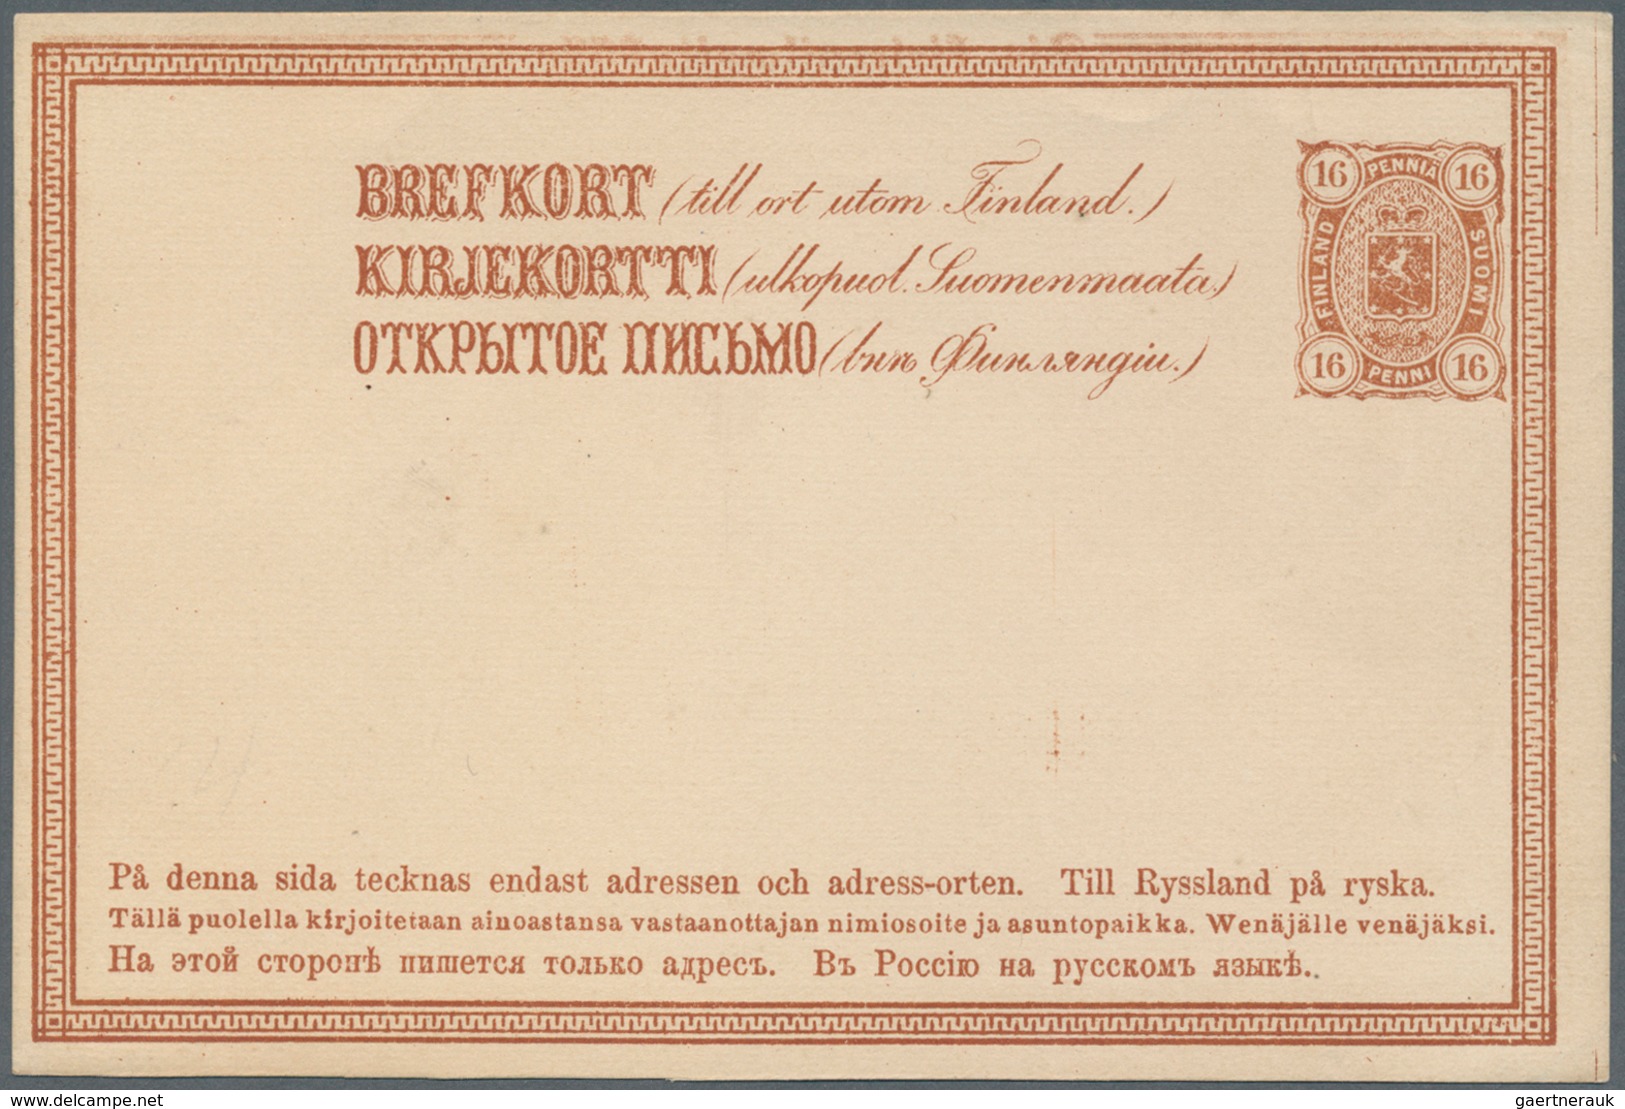 Finnland - Ganzsachen: 1872 from, comprehensive lot of 153 predominantly used postal stationeries co